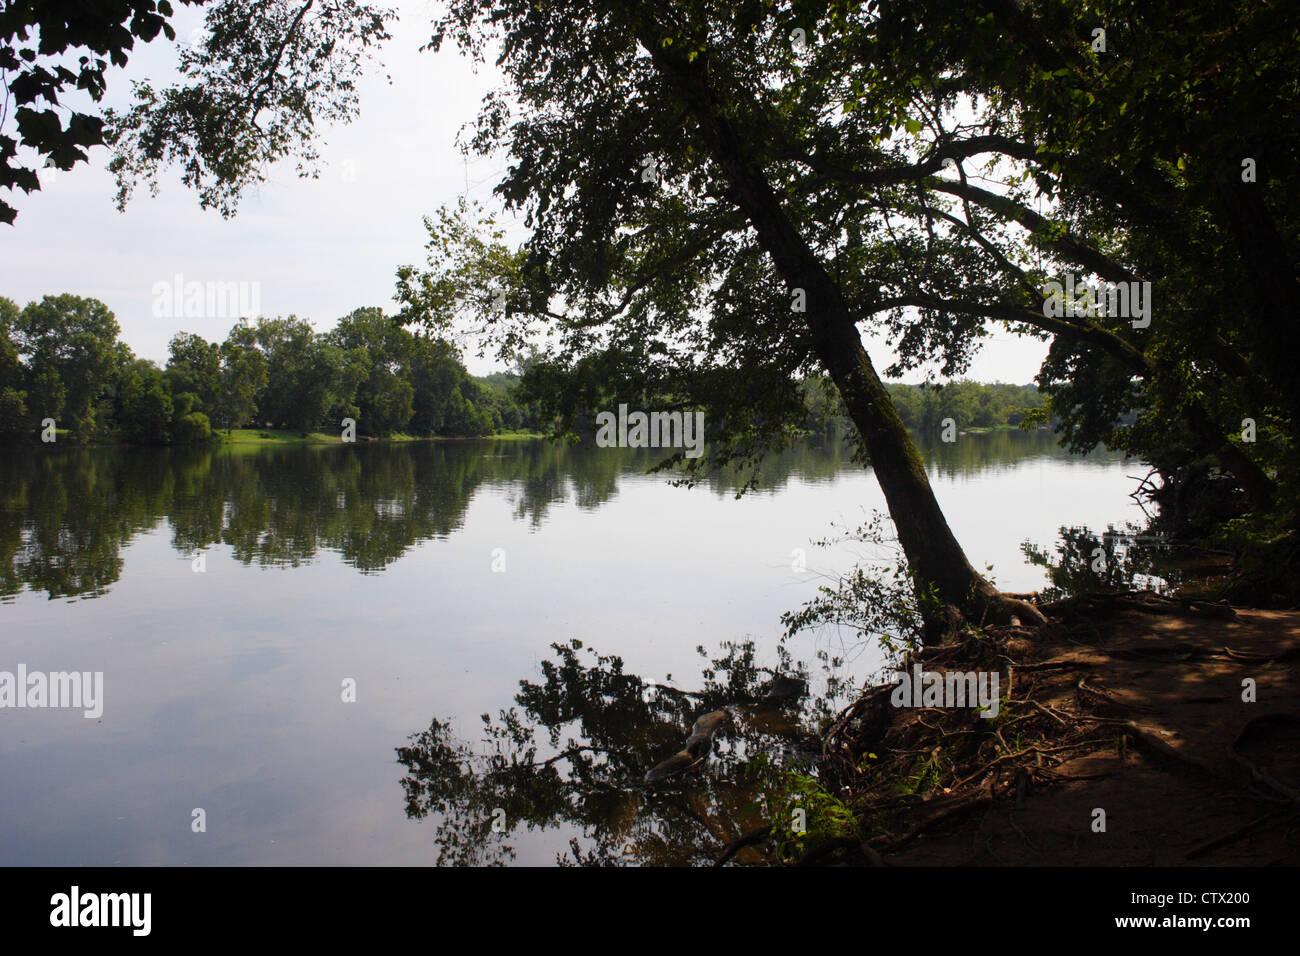 A view along the banks of the James river near the city of Richmond, Virginia Stock Photo